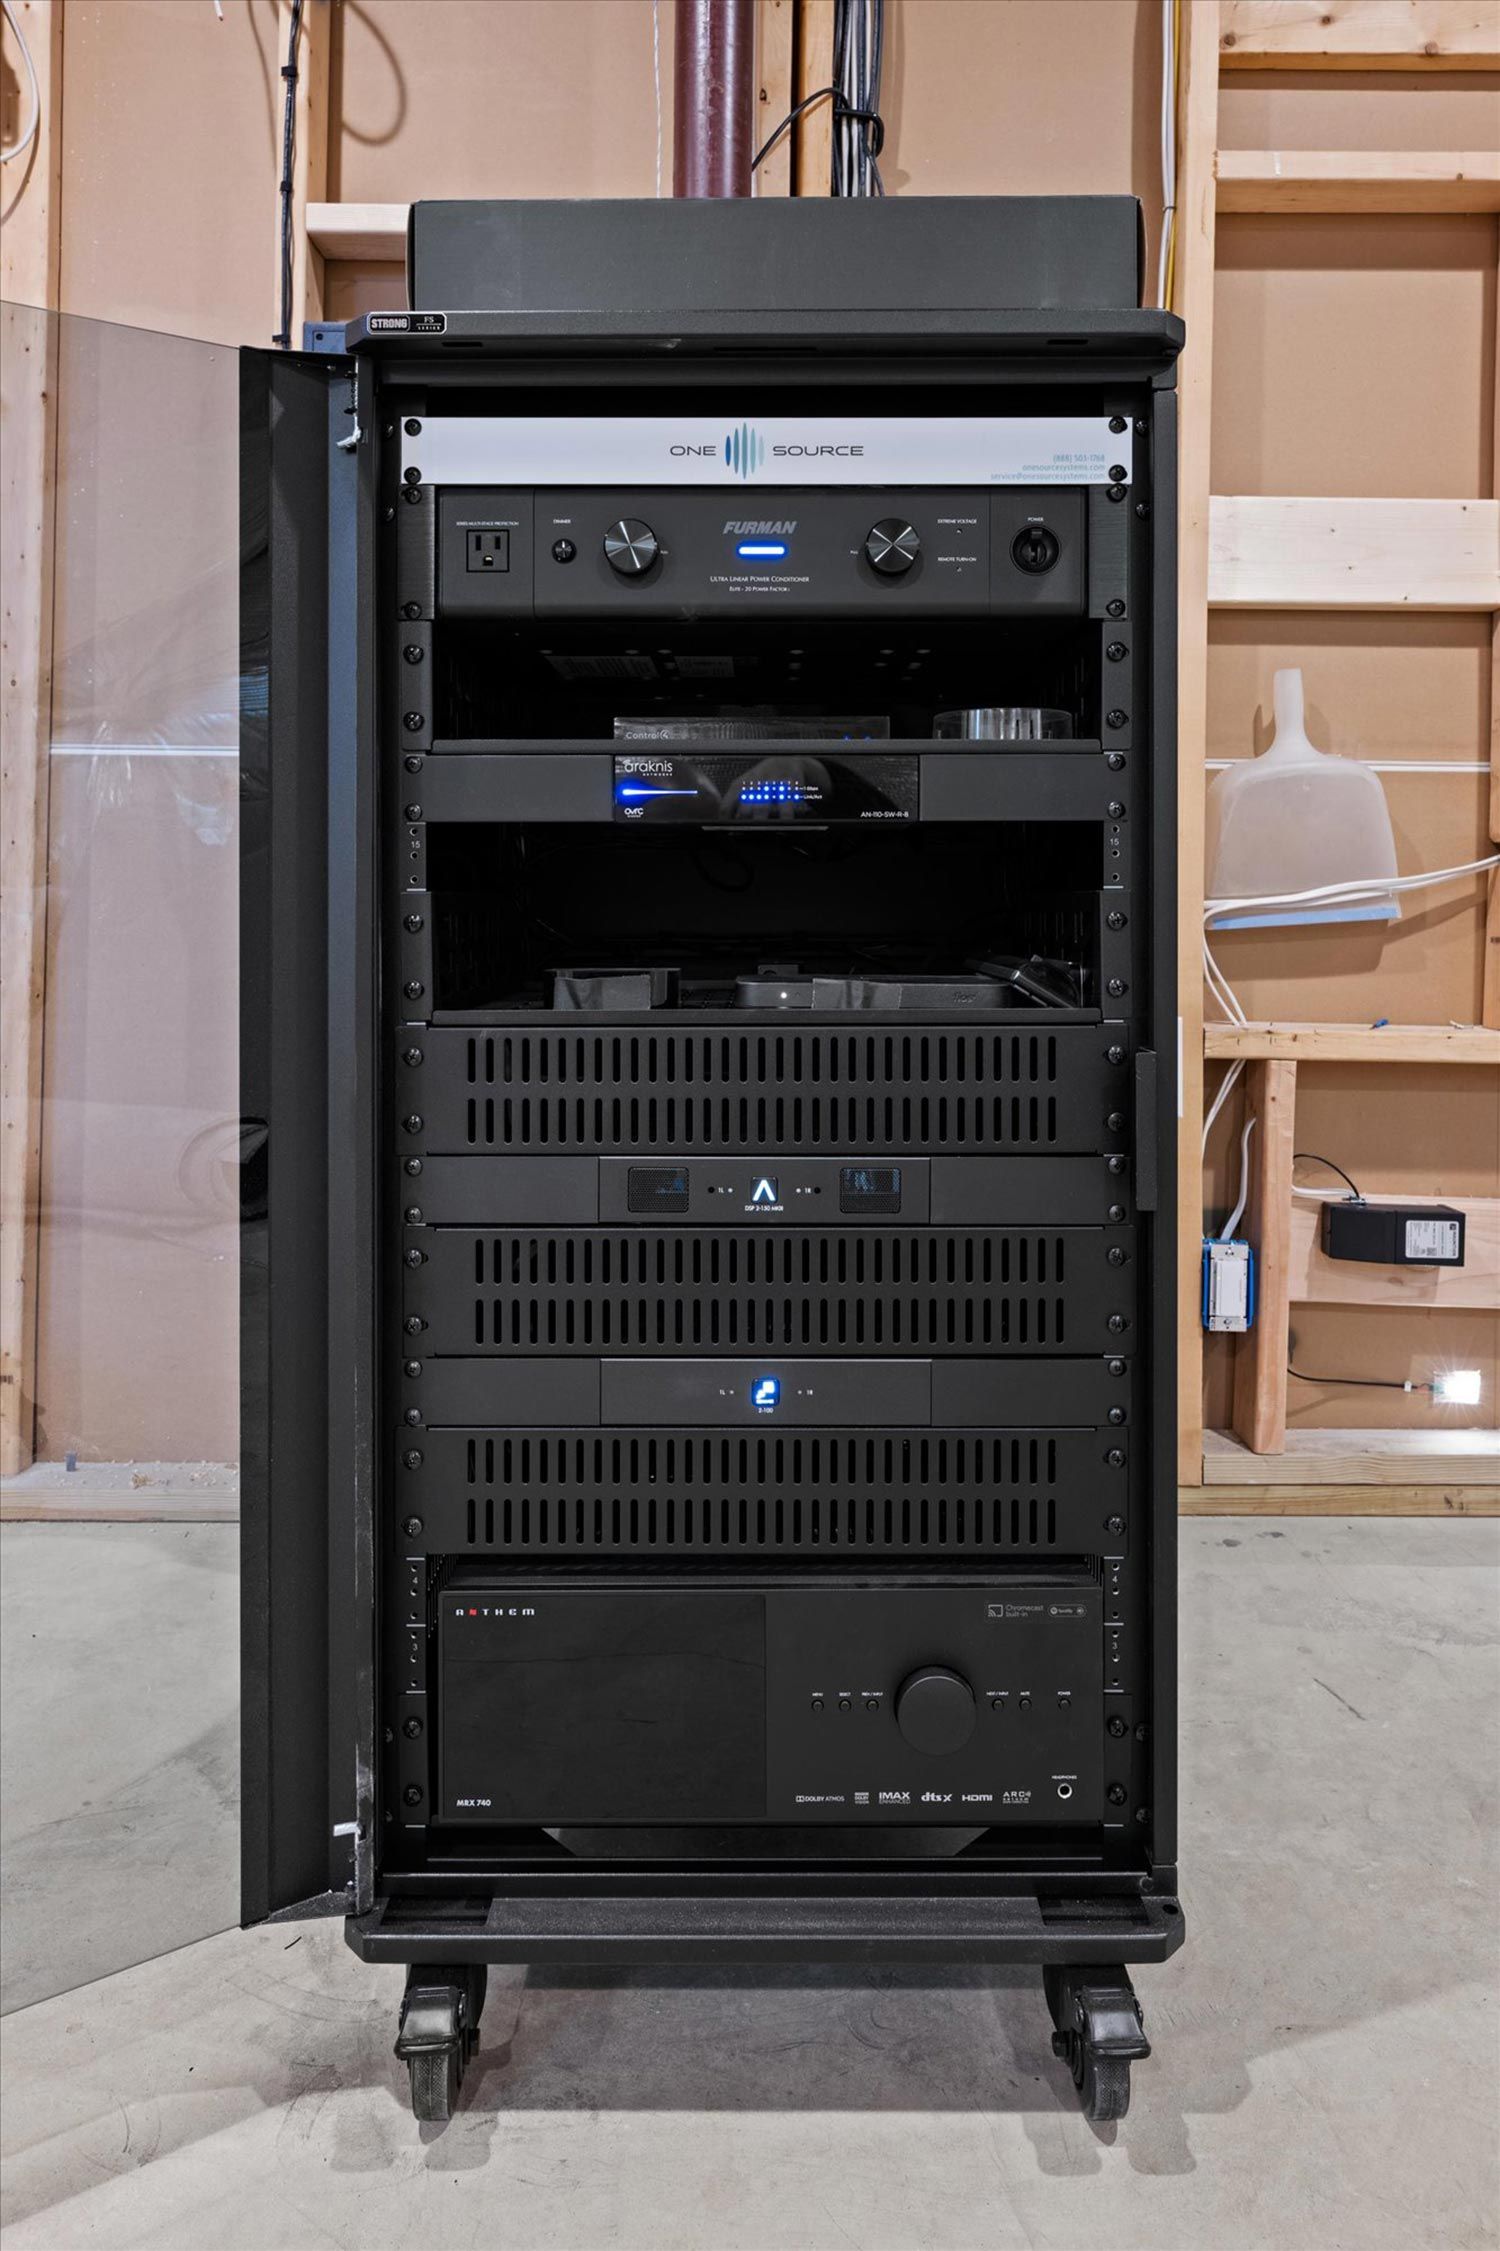 High-end equipment rack in a home theater system setup, showcasing various audio and video components neatly arranged in a black cabinet.